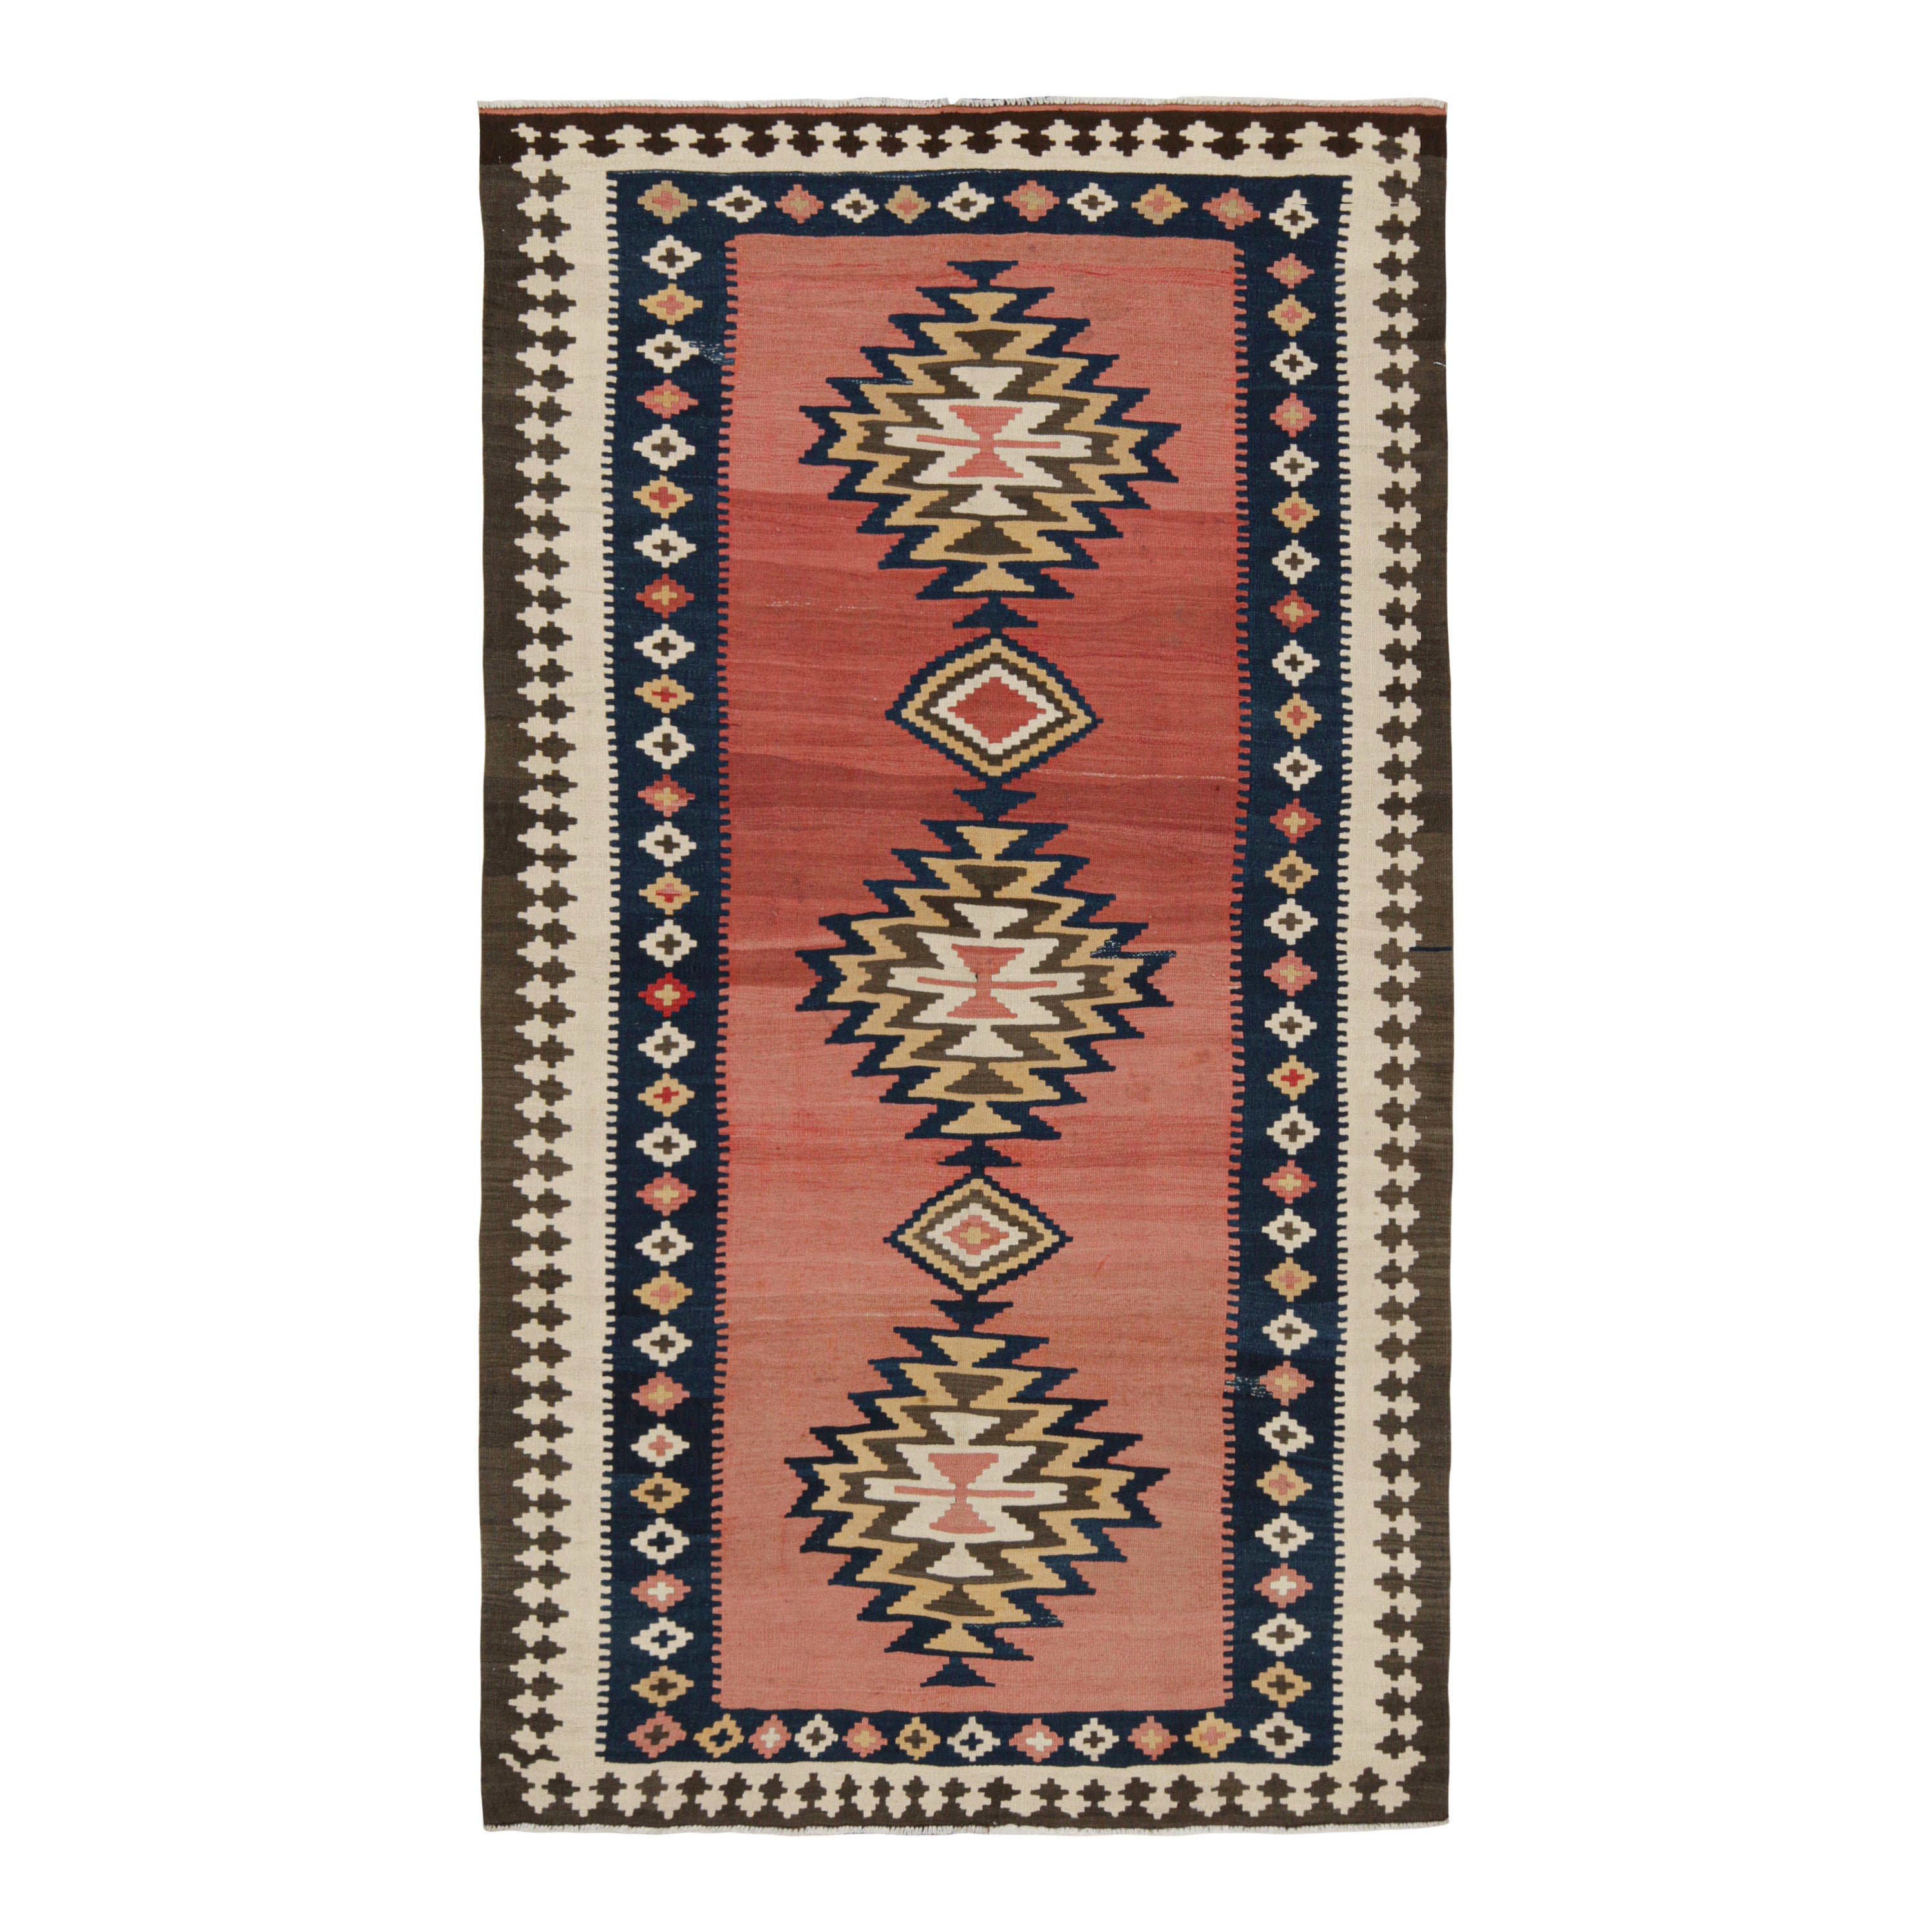 Vintage Shahsavan Persian Kilim in Red with Medallion Patterns by Rug & Kilim For Sale